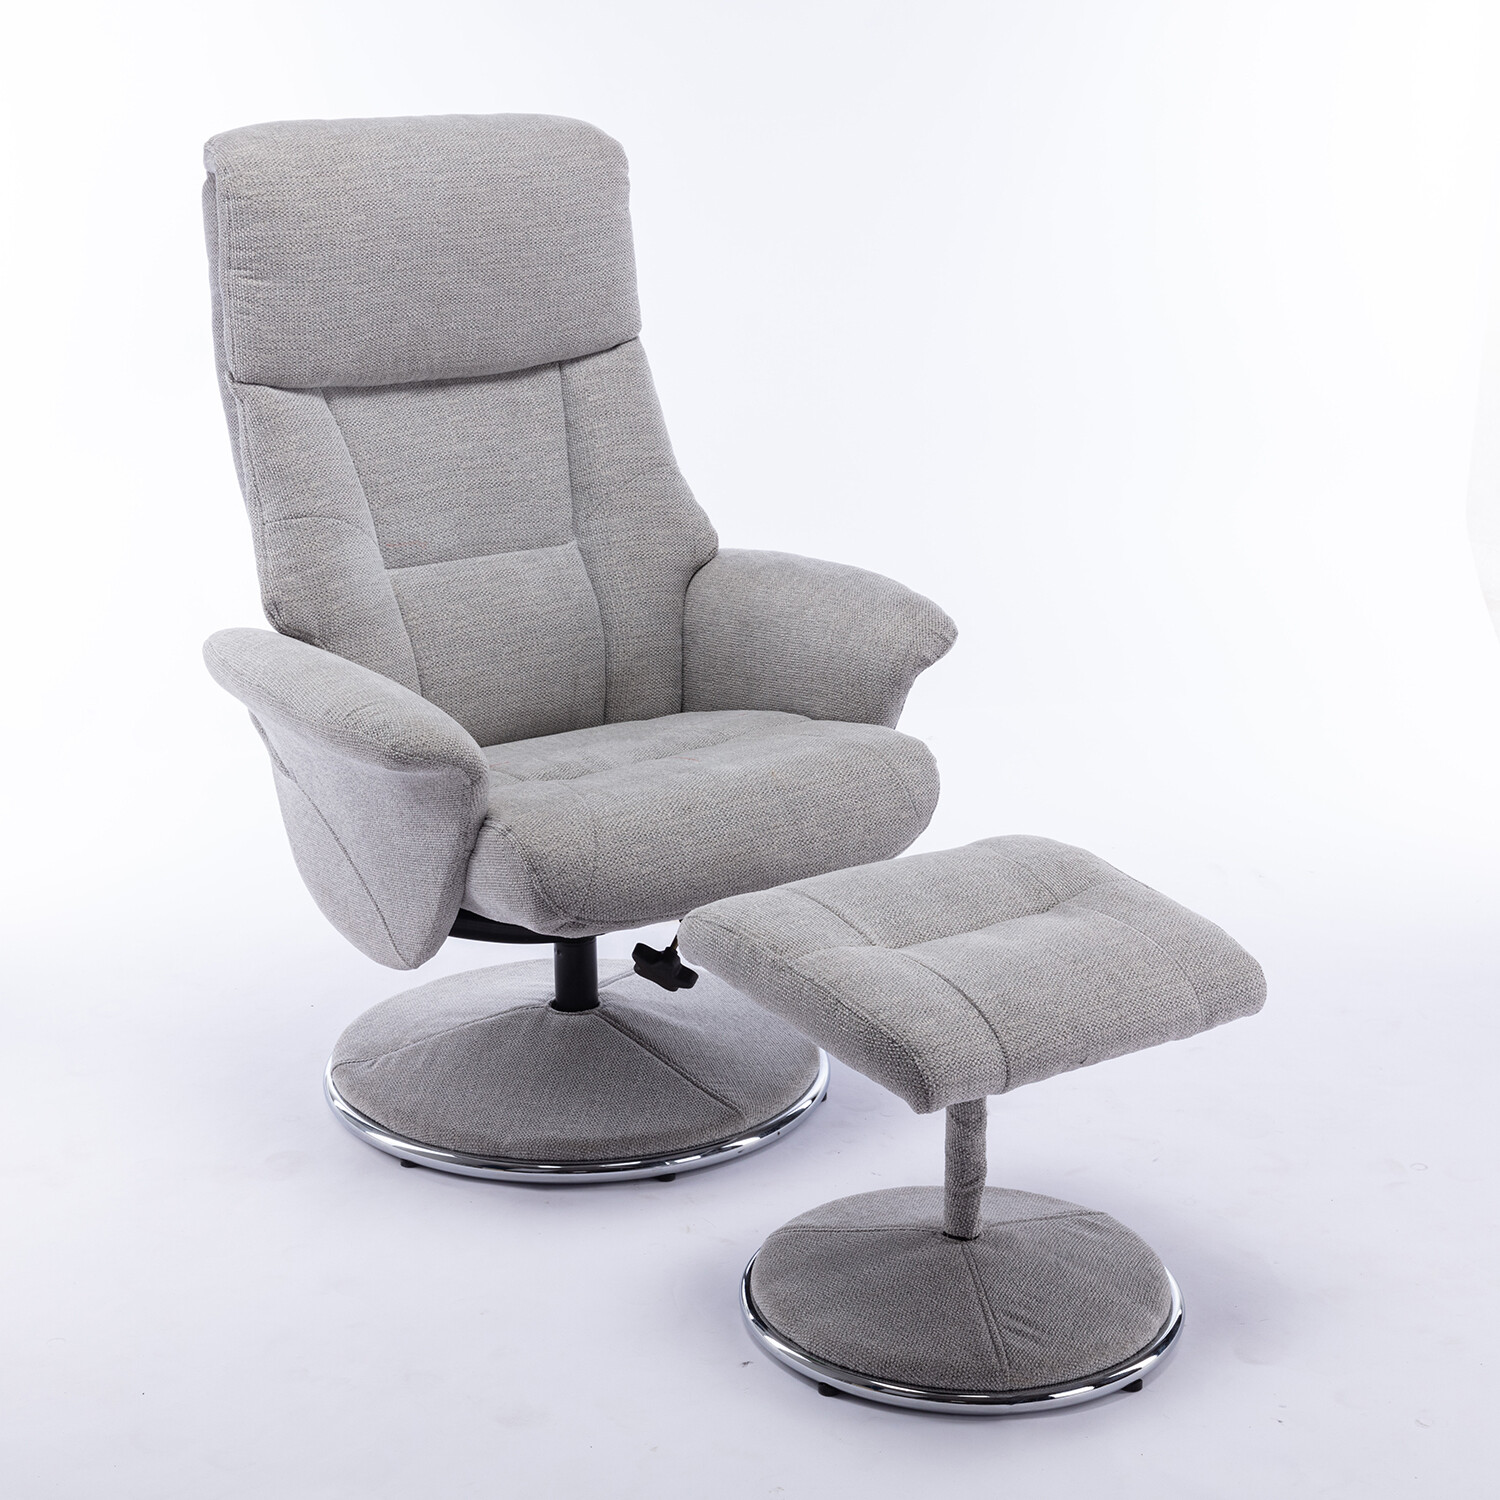 Madrid Grey Fabric Swivel TV Chair with Footrest Image 5